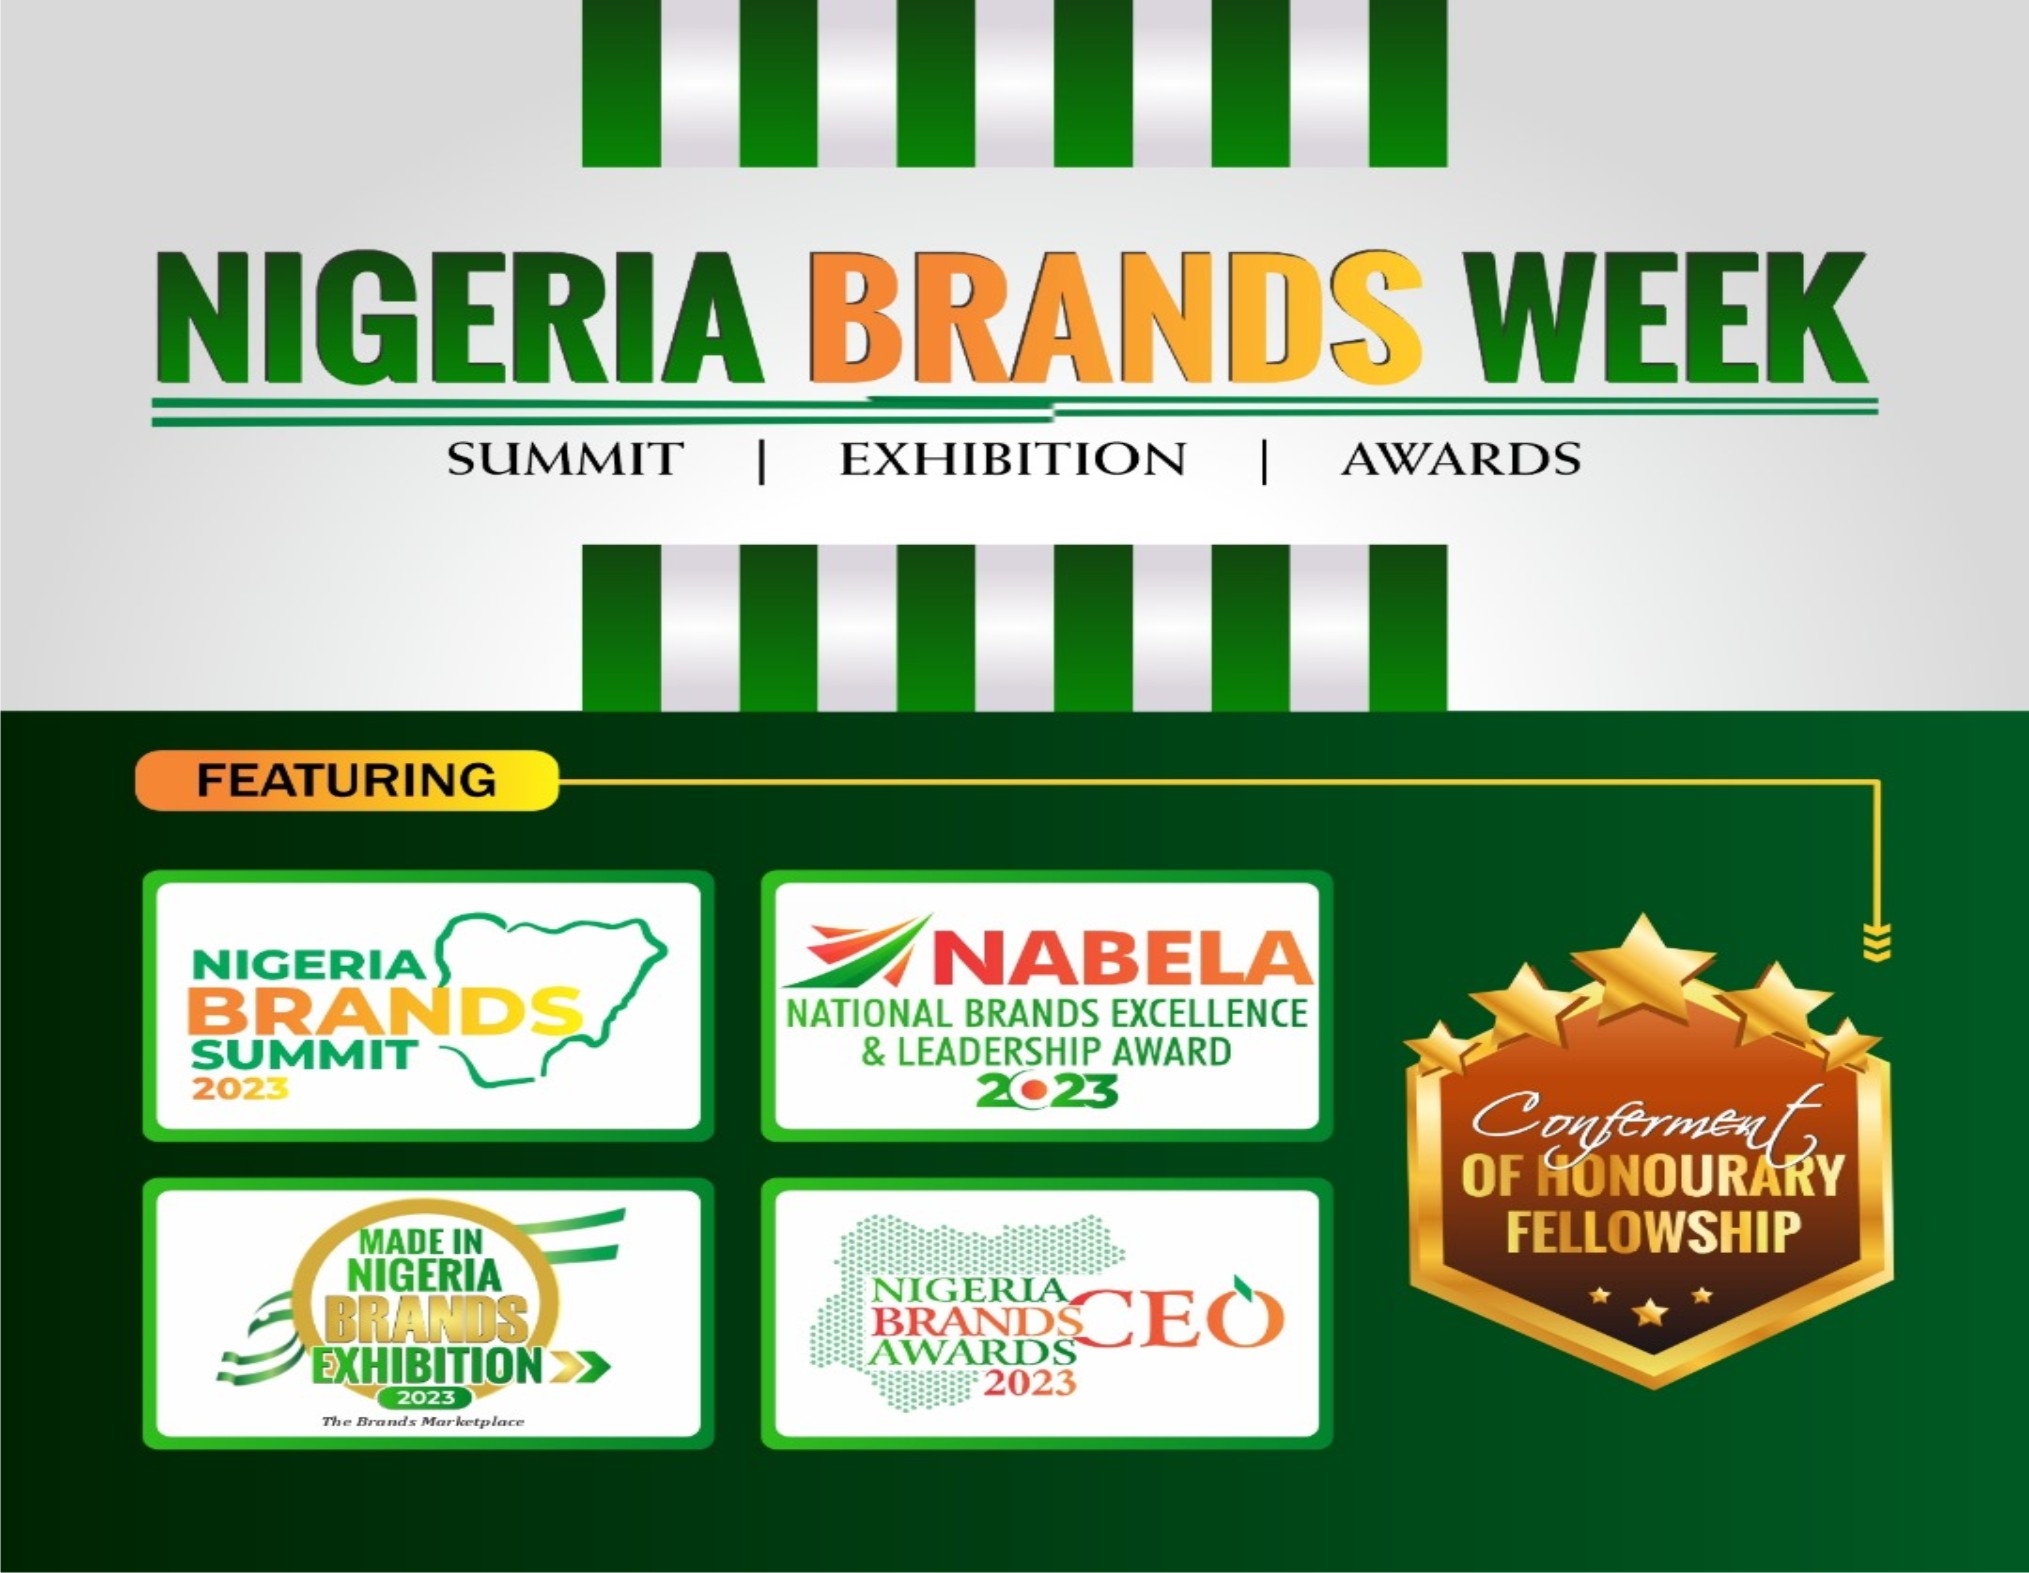 Institute Of Brands Management To Hold Nigeria Brands Week-marketingspace.com.ng